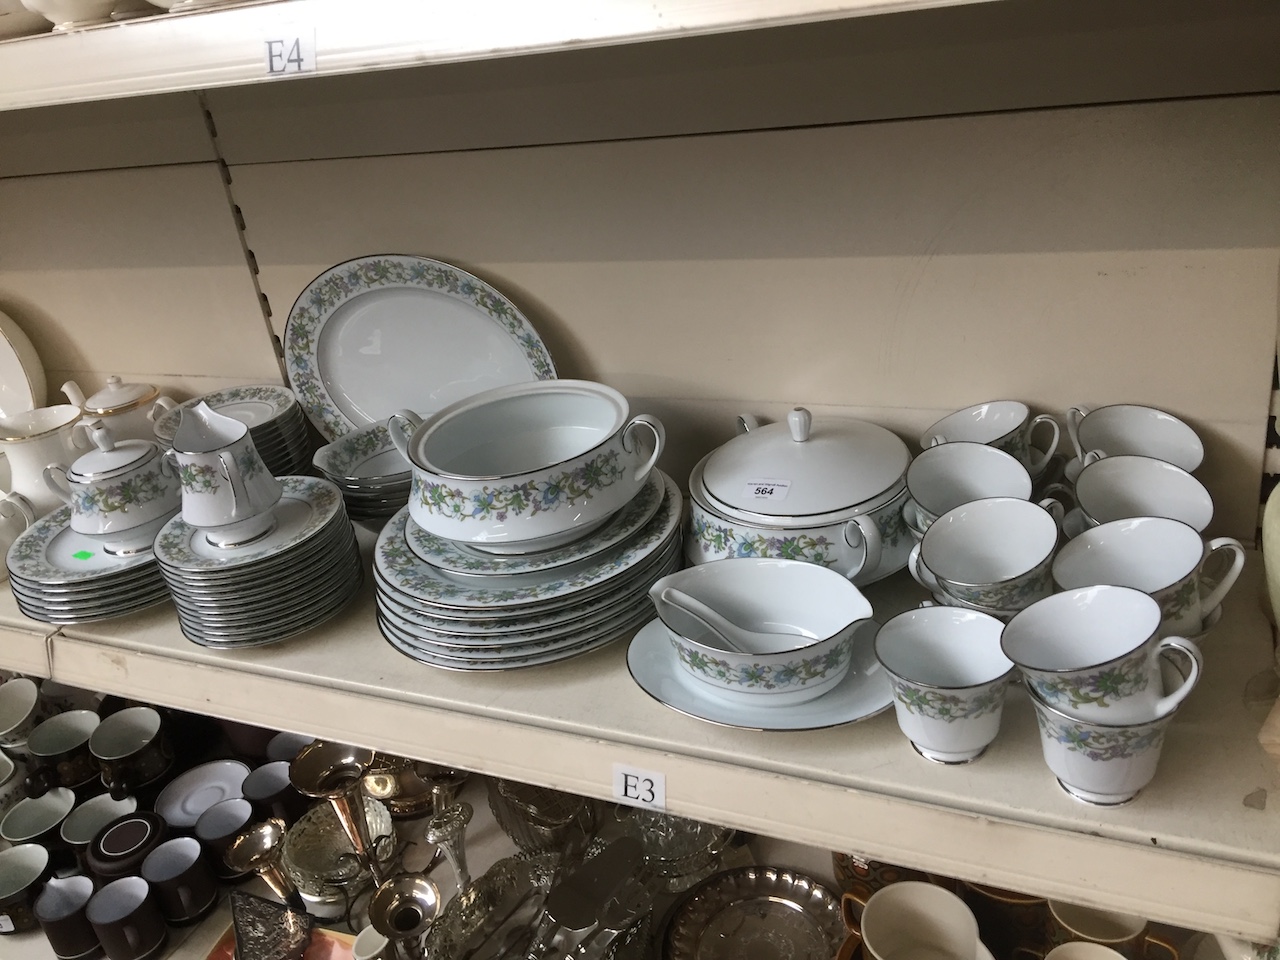 Noritake Tradition dinner waer approx. 60 pieces